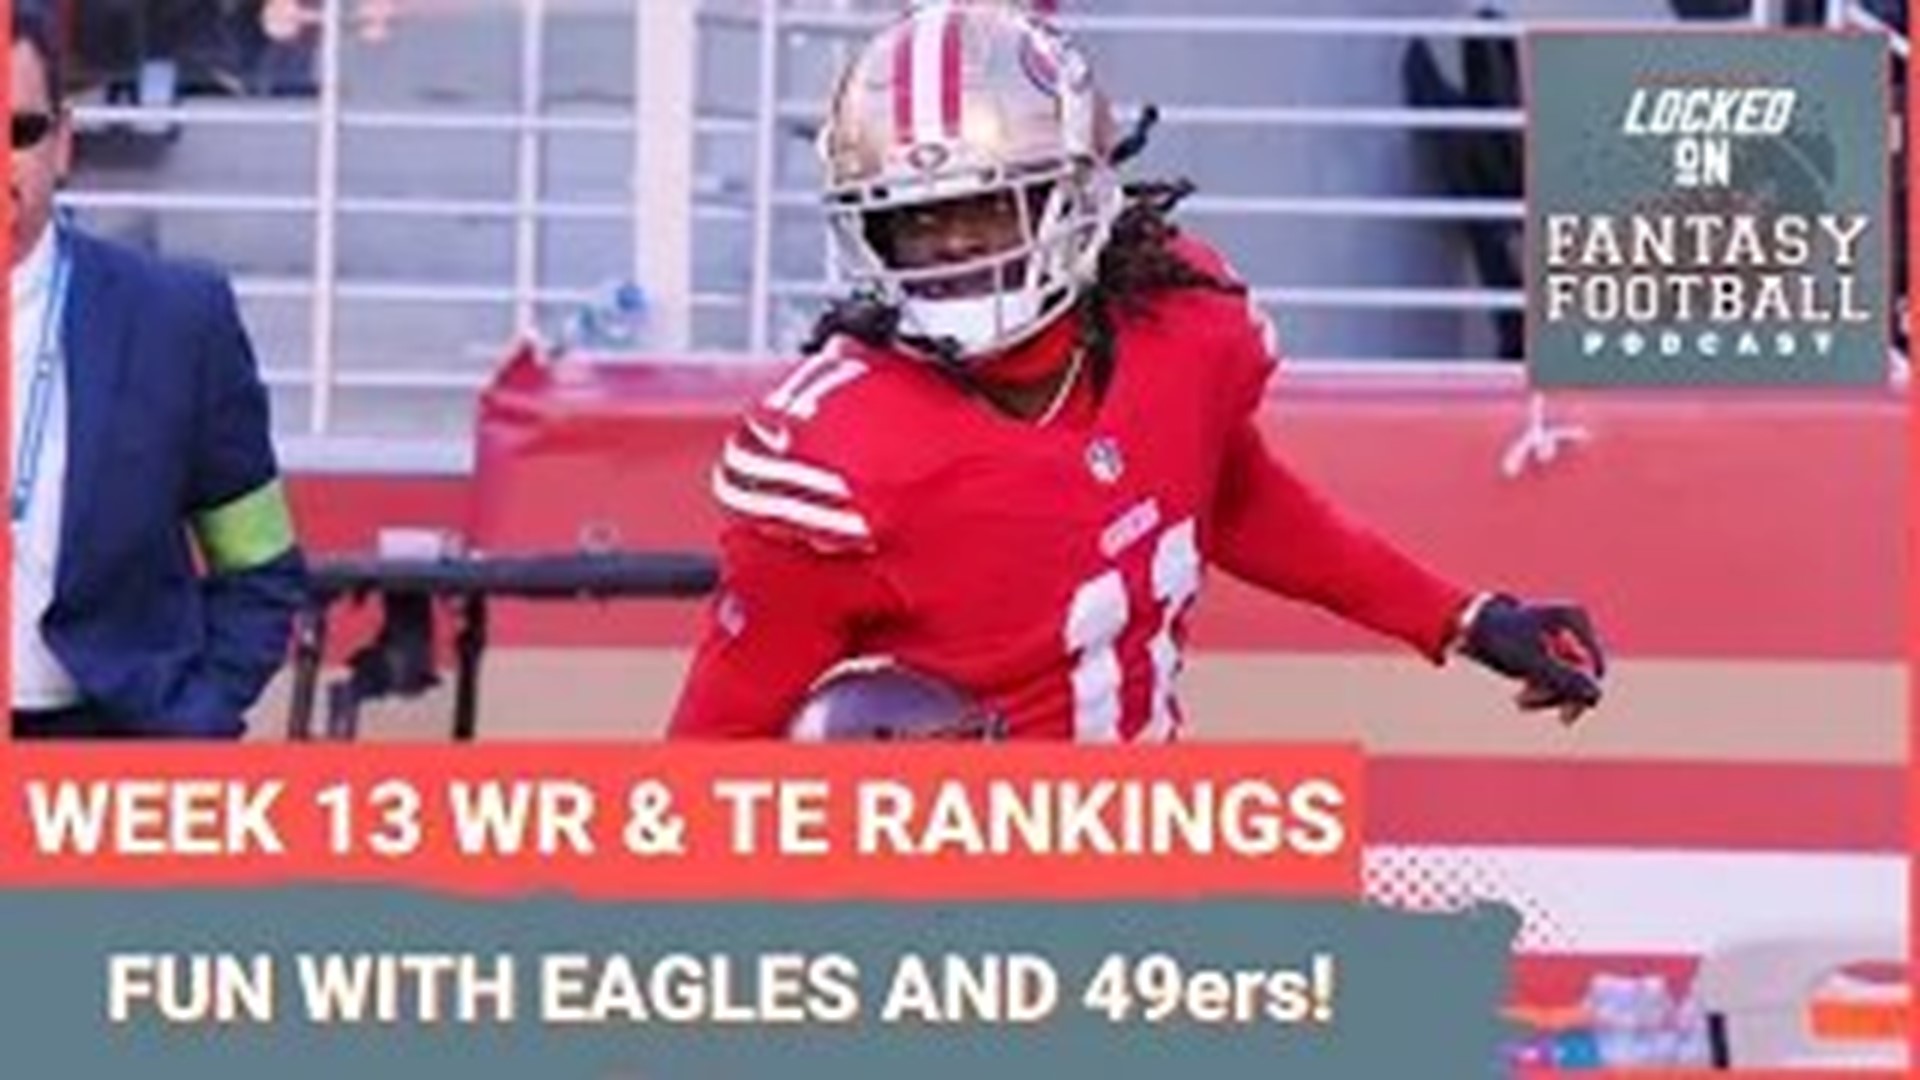 Sporting News' Vinnie Iyer and NFL Media's Michelle Magdziuk compare and contrast their fantasy football wide receiver and tight end rankings for Week 13.